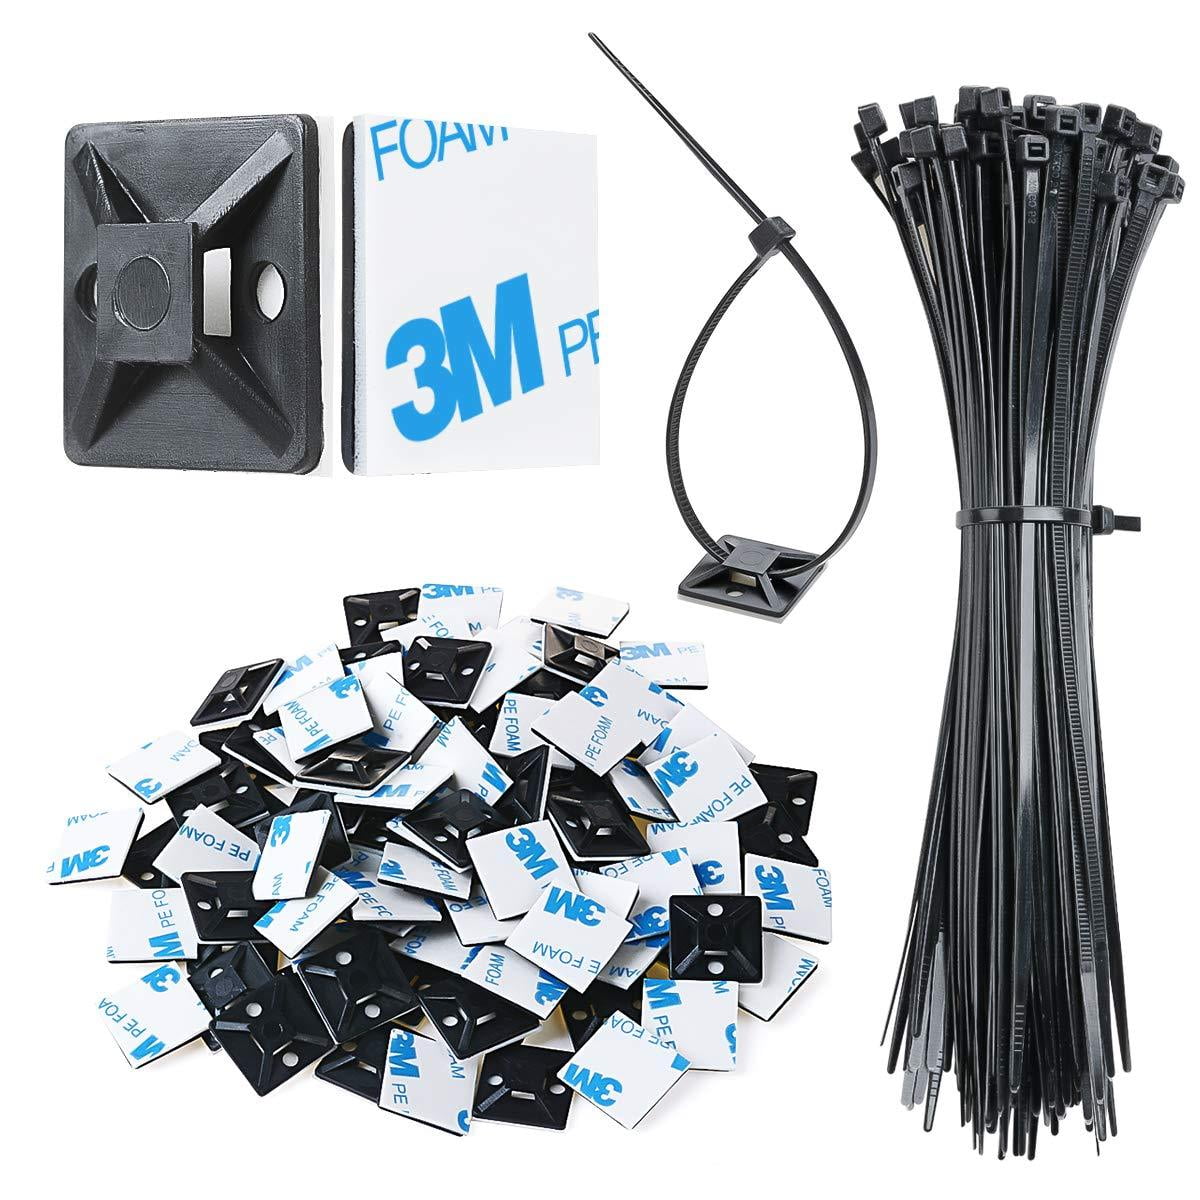 Pack of 100 Black Cable Ties Adhesive Fixings Base Self-Adhesive Cable Clamp 